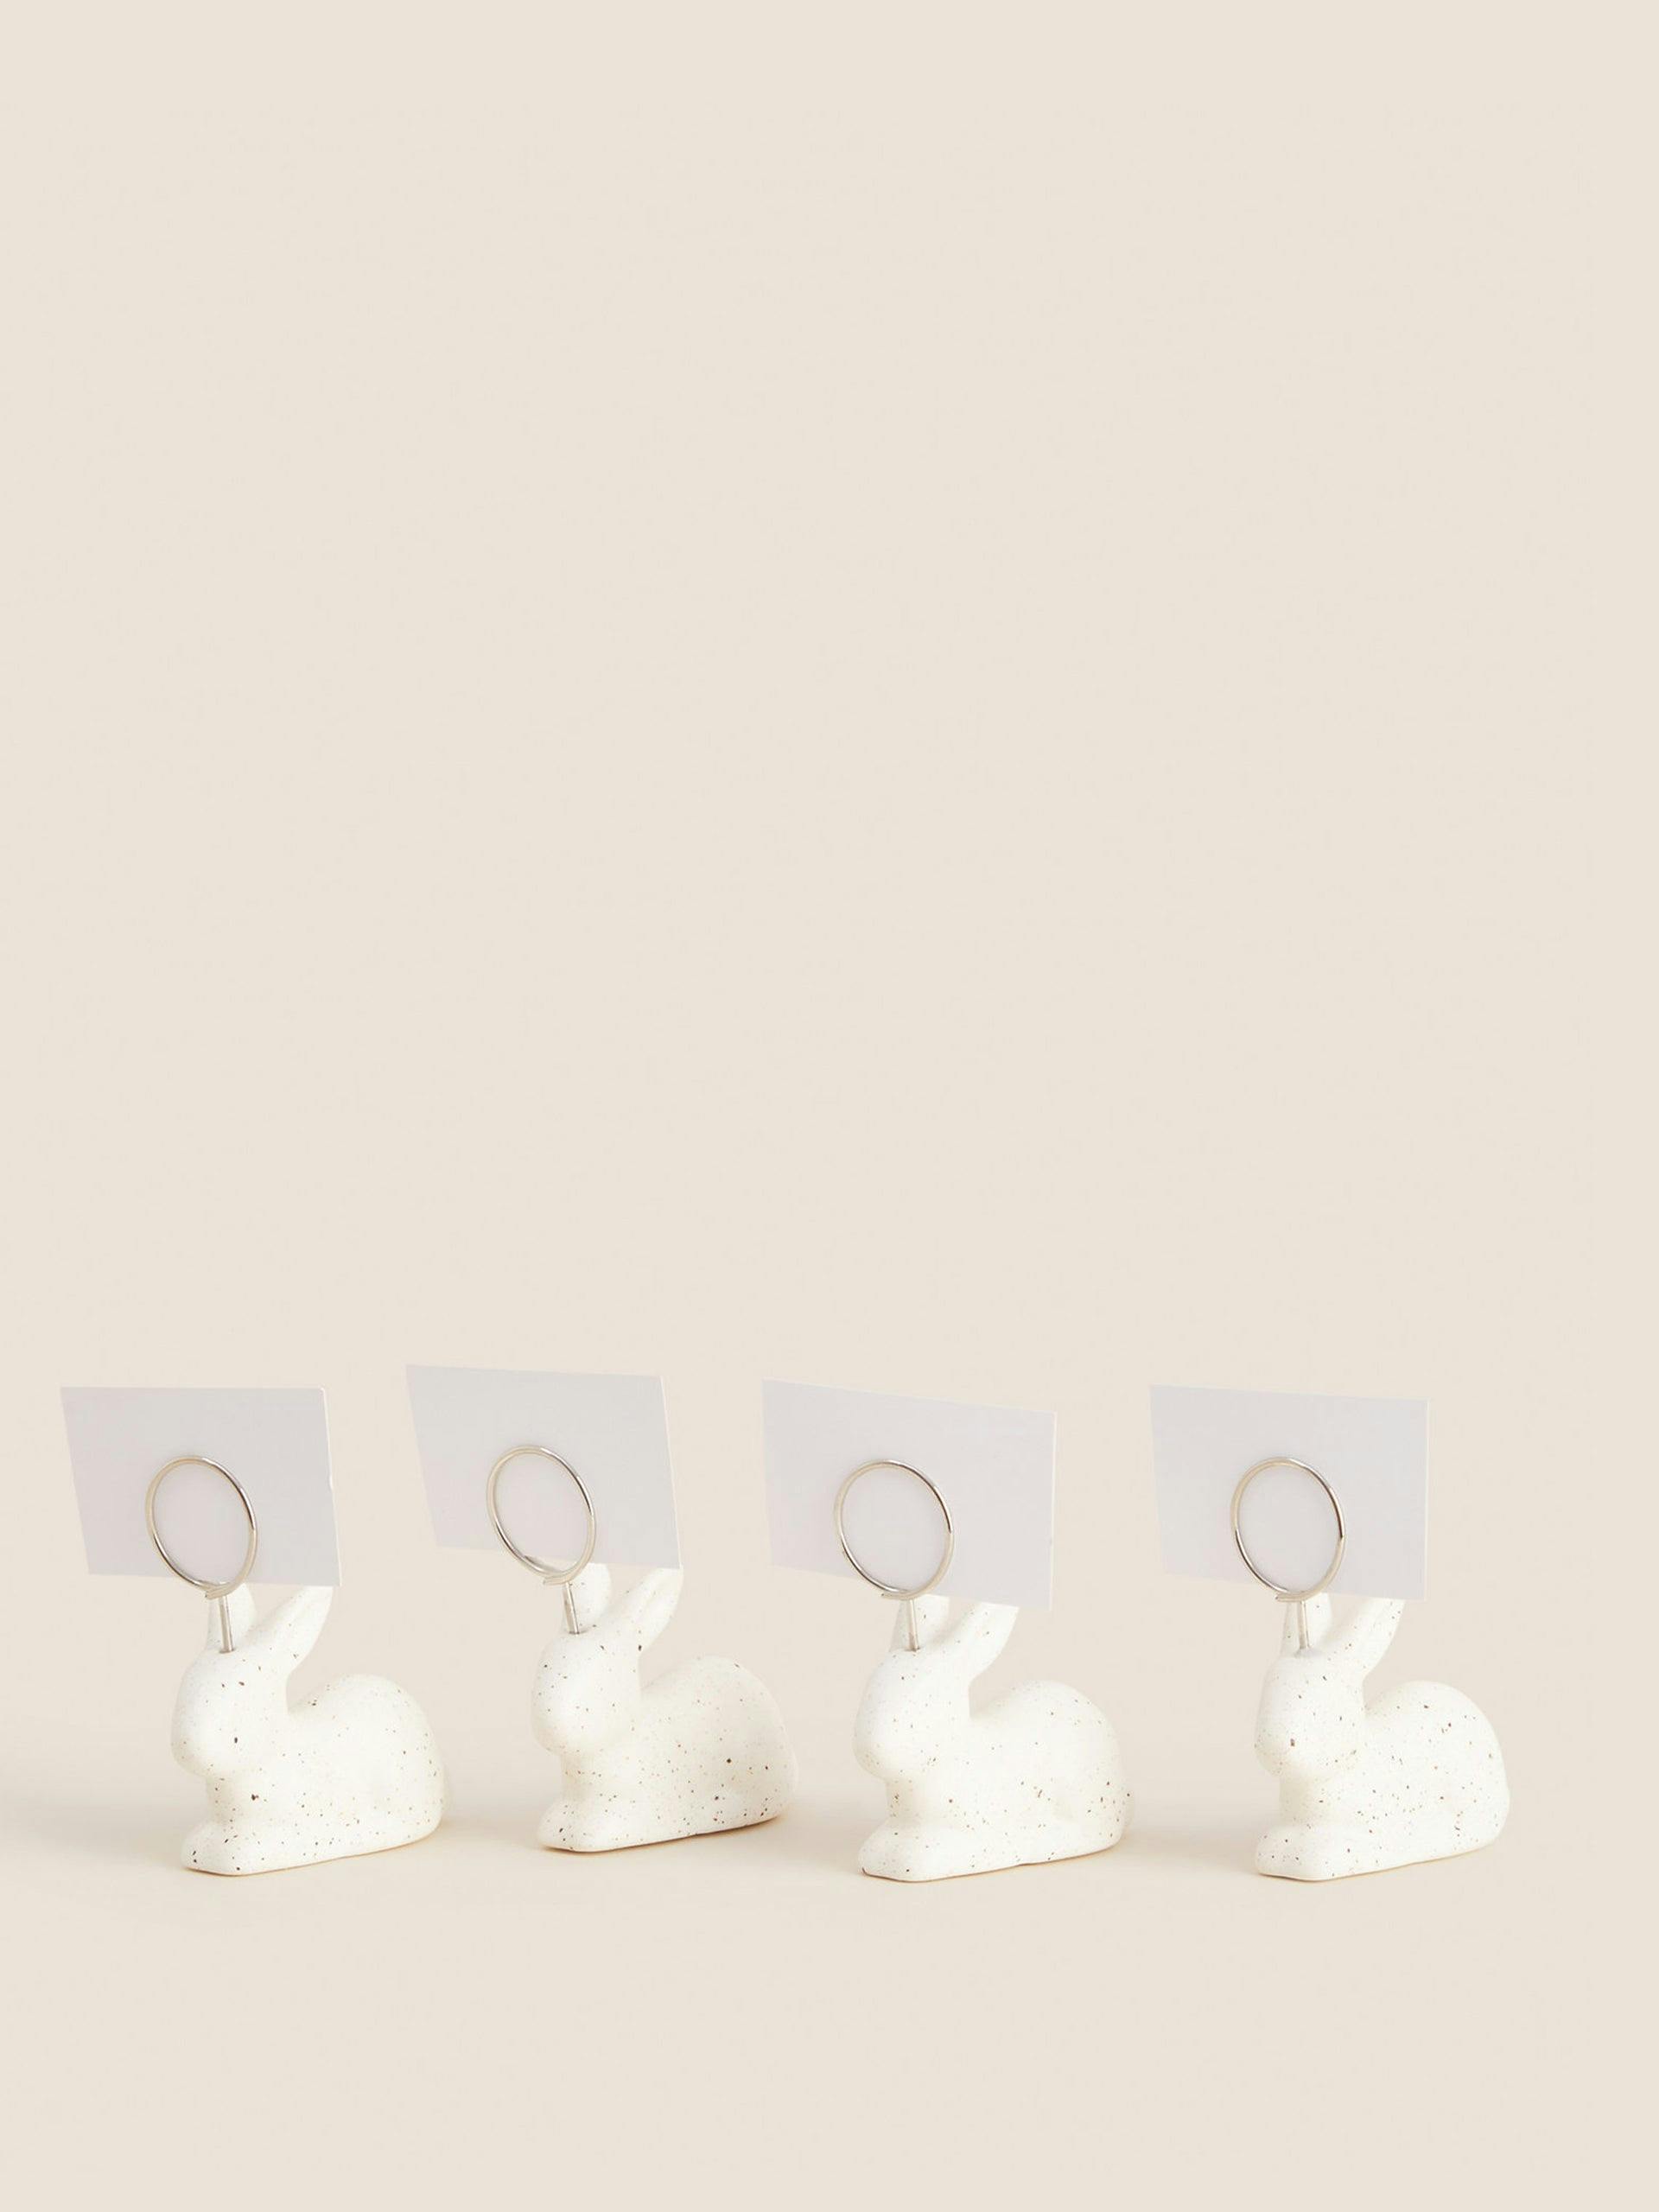 Bunny place holders (set of 4)